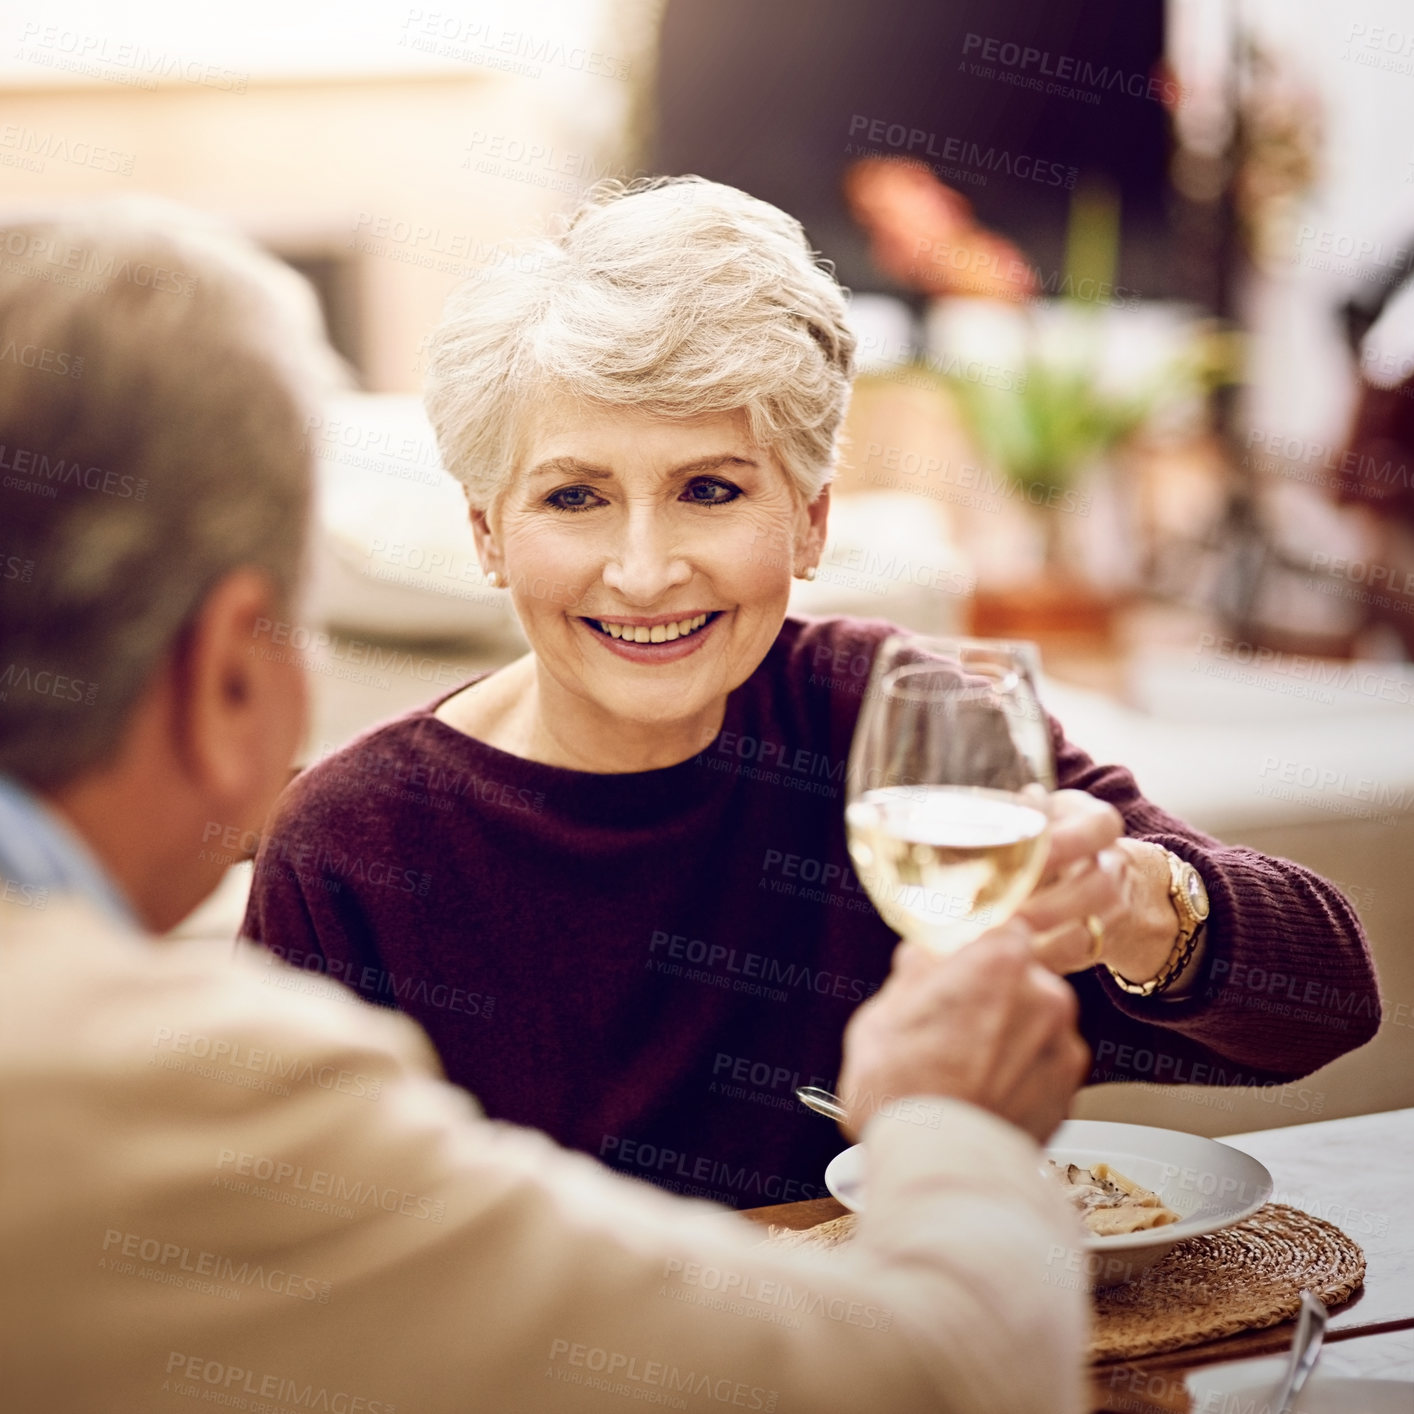 Buy stock photo Shot of an elderly couple toasting with wine glasses while they enjoy a meal at home